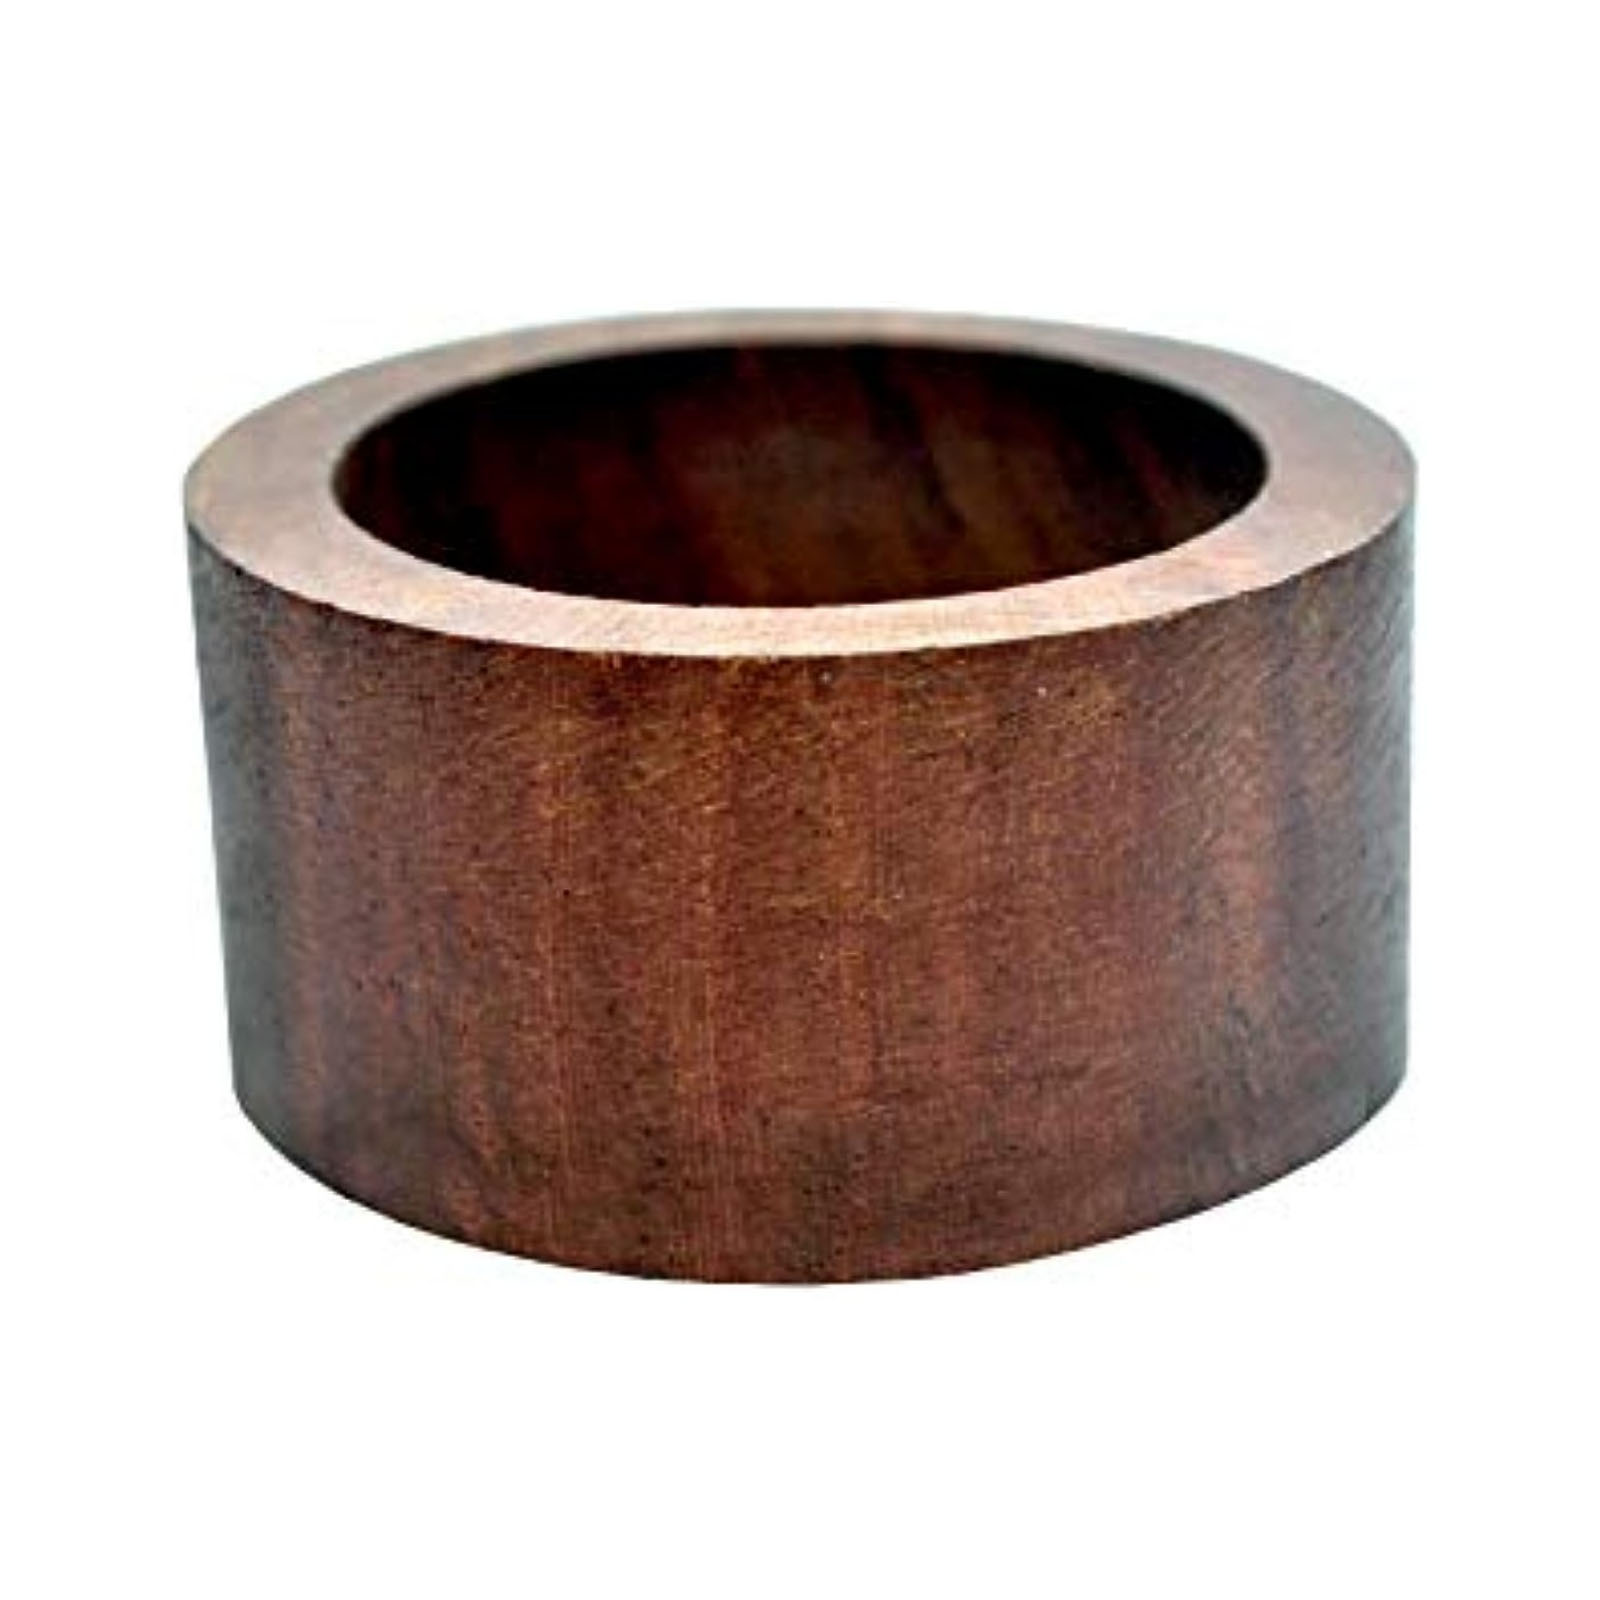 6/12pcs, Wooden Napkin Rings, Handcrafted Wood Napkin Rings, Rustic Style  Napkin Buckles, Perfect For Dining, Anniversaries, Birthdays, And Christmas